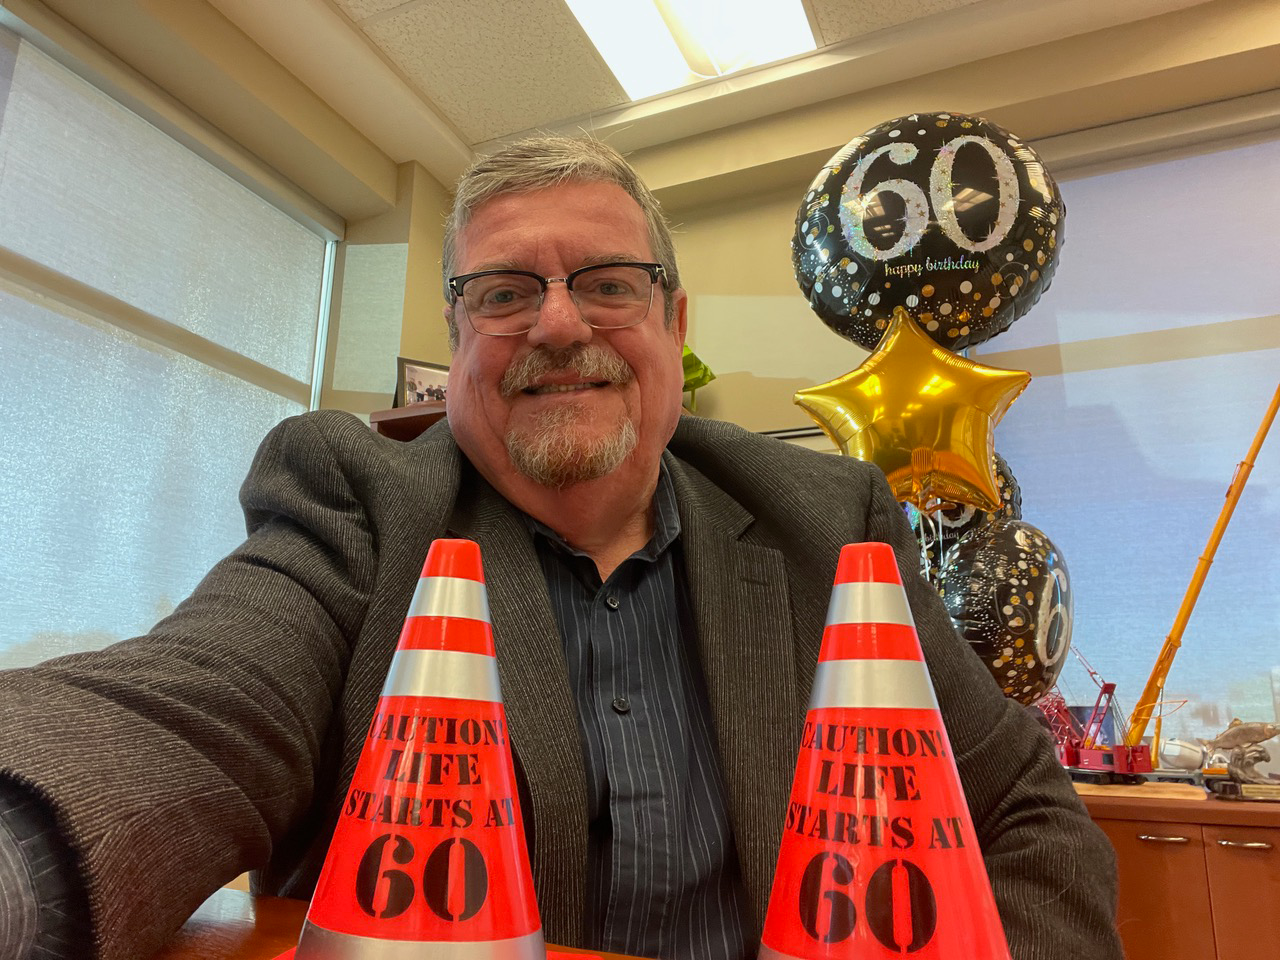 Business Manager Mike Gallagher celebrates his 60th birthday at the office.